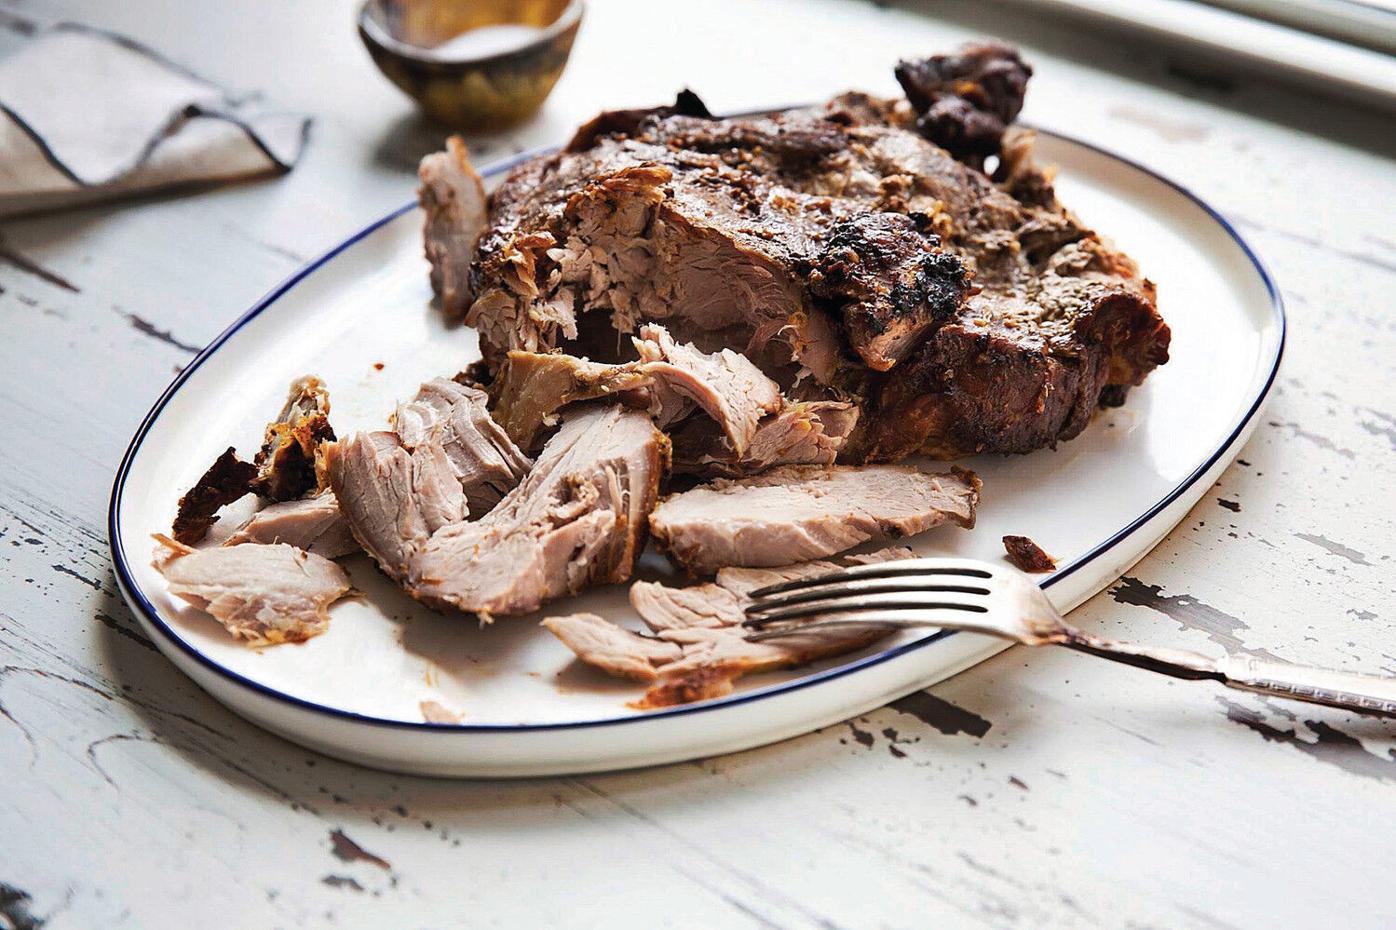 Slow-cooked pork roast is more than one meal